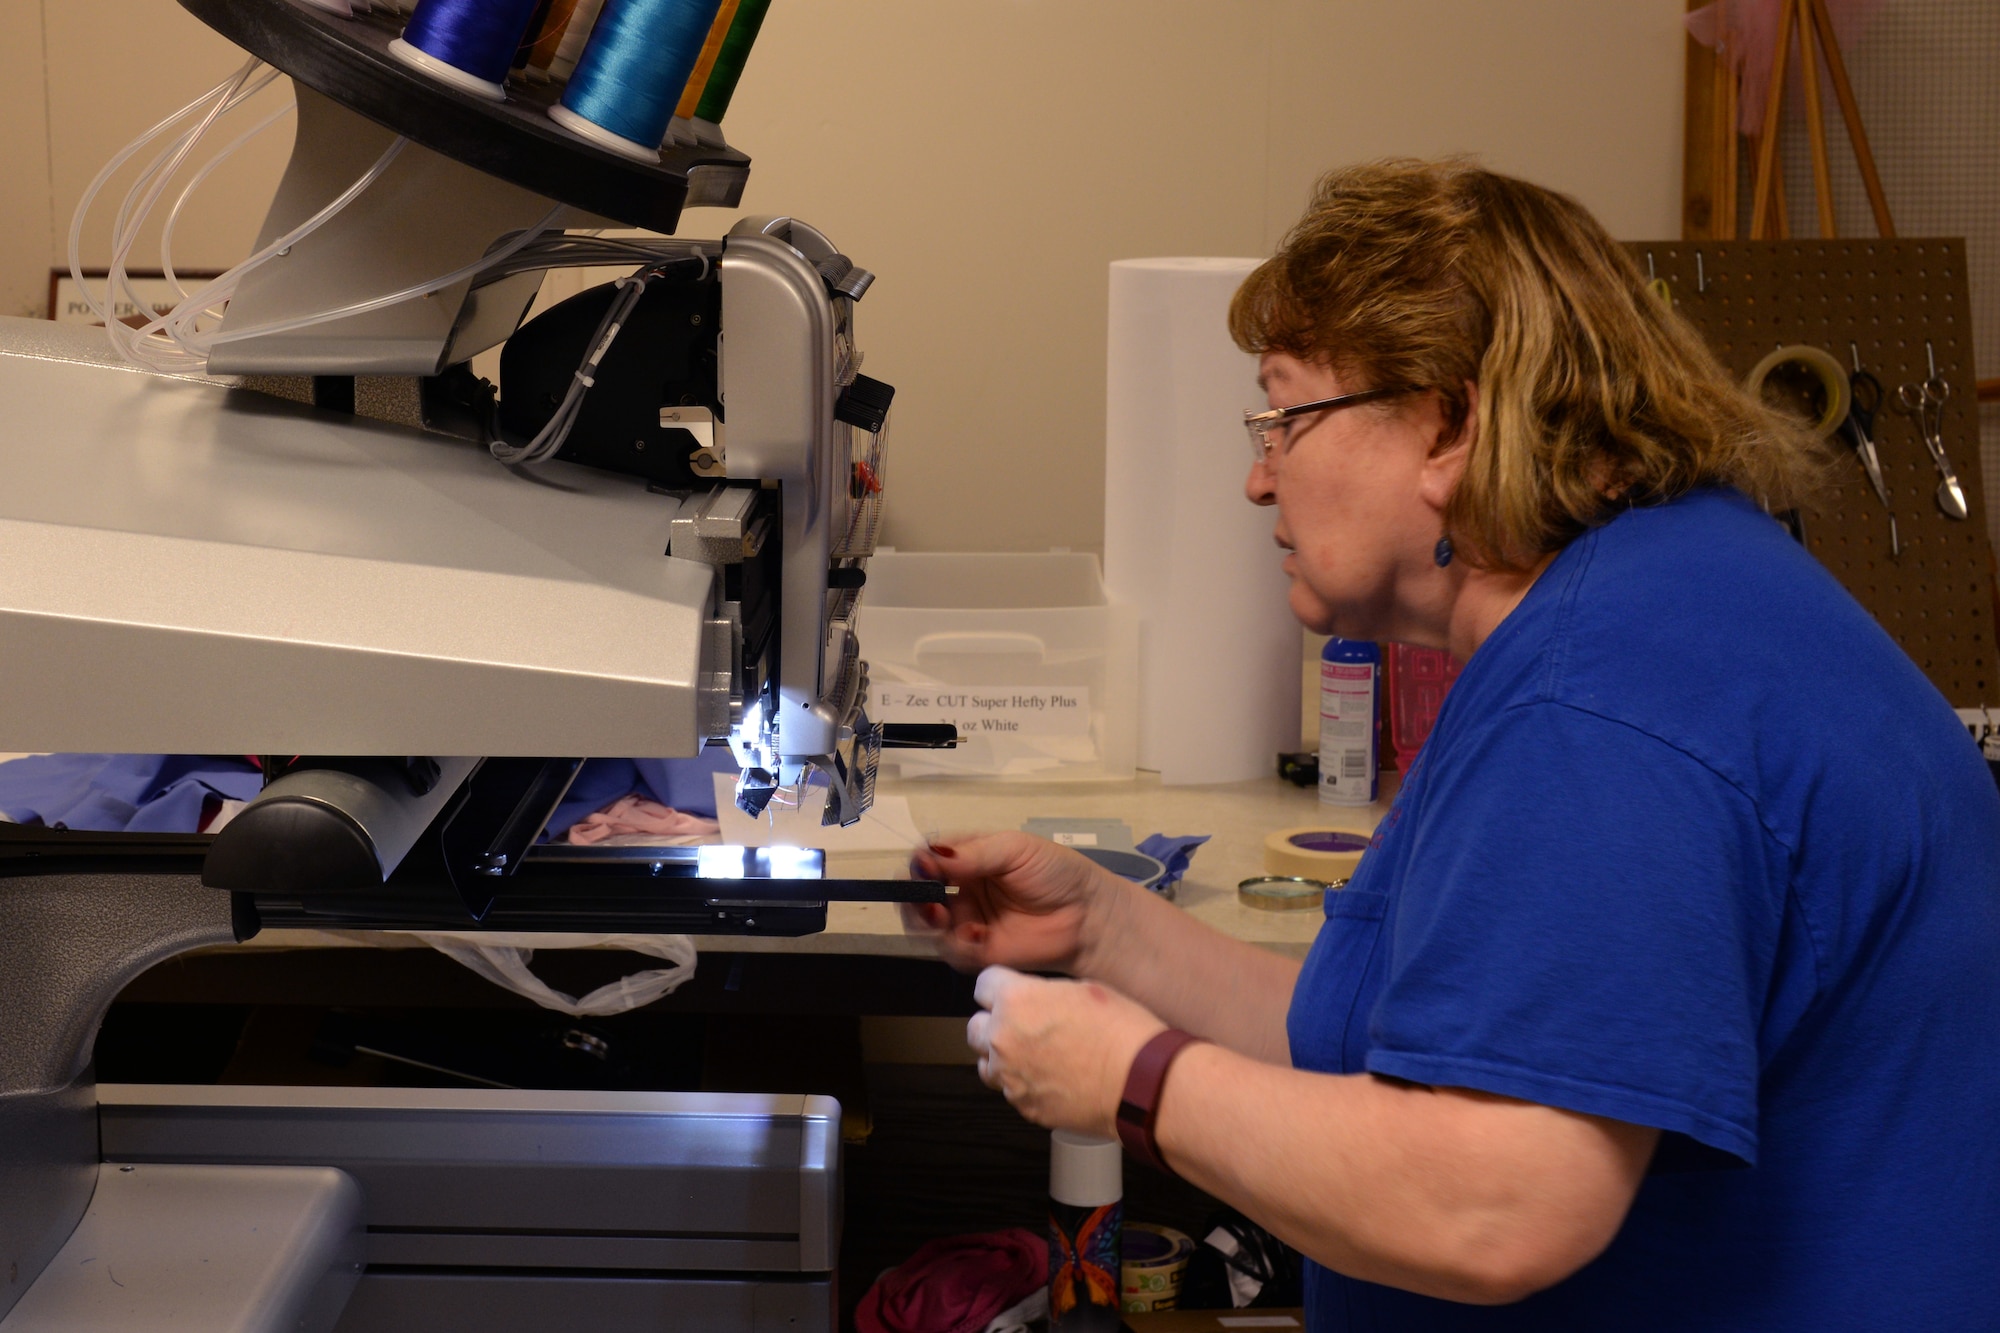 Linda Bowers, Arts and Crafts Center framer & embroiderer, threads a needle through an embroidery machine Feb. 2, 2016, Keesler Air Force Base, Miss. The embroidery shop is a newly opened segment of the Arts and Crafts Center that embroiders everything from baby clothes to name tapes. (U.S. Air Force photo by Airman 1st Class Travis Beihl)